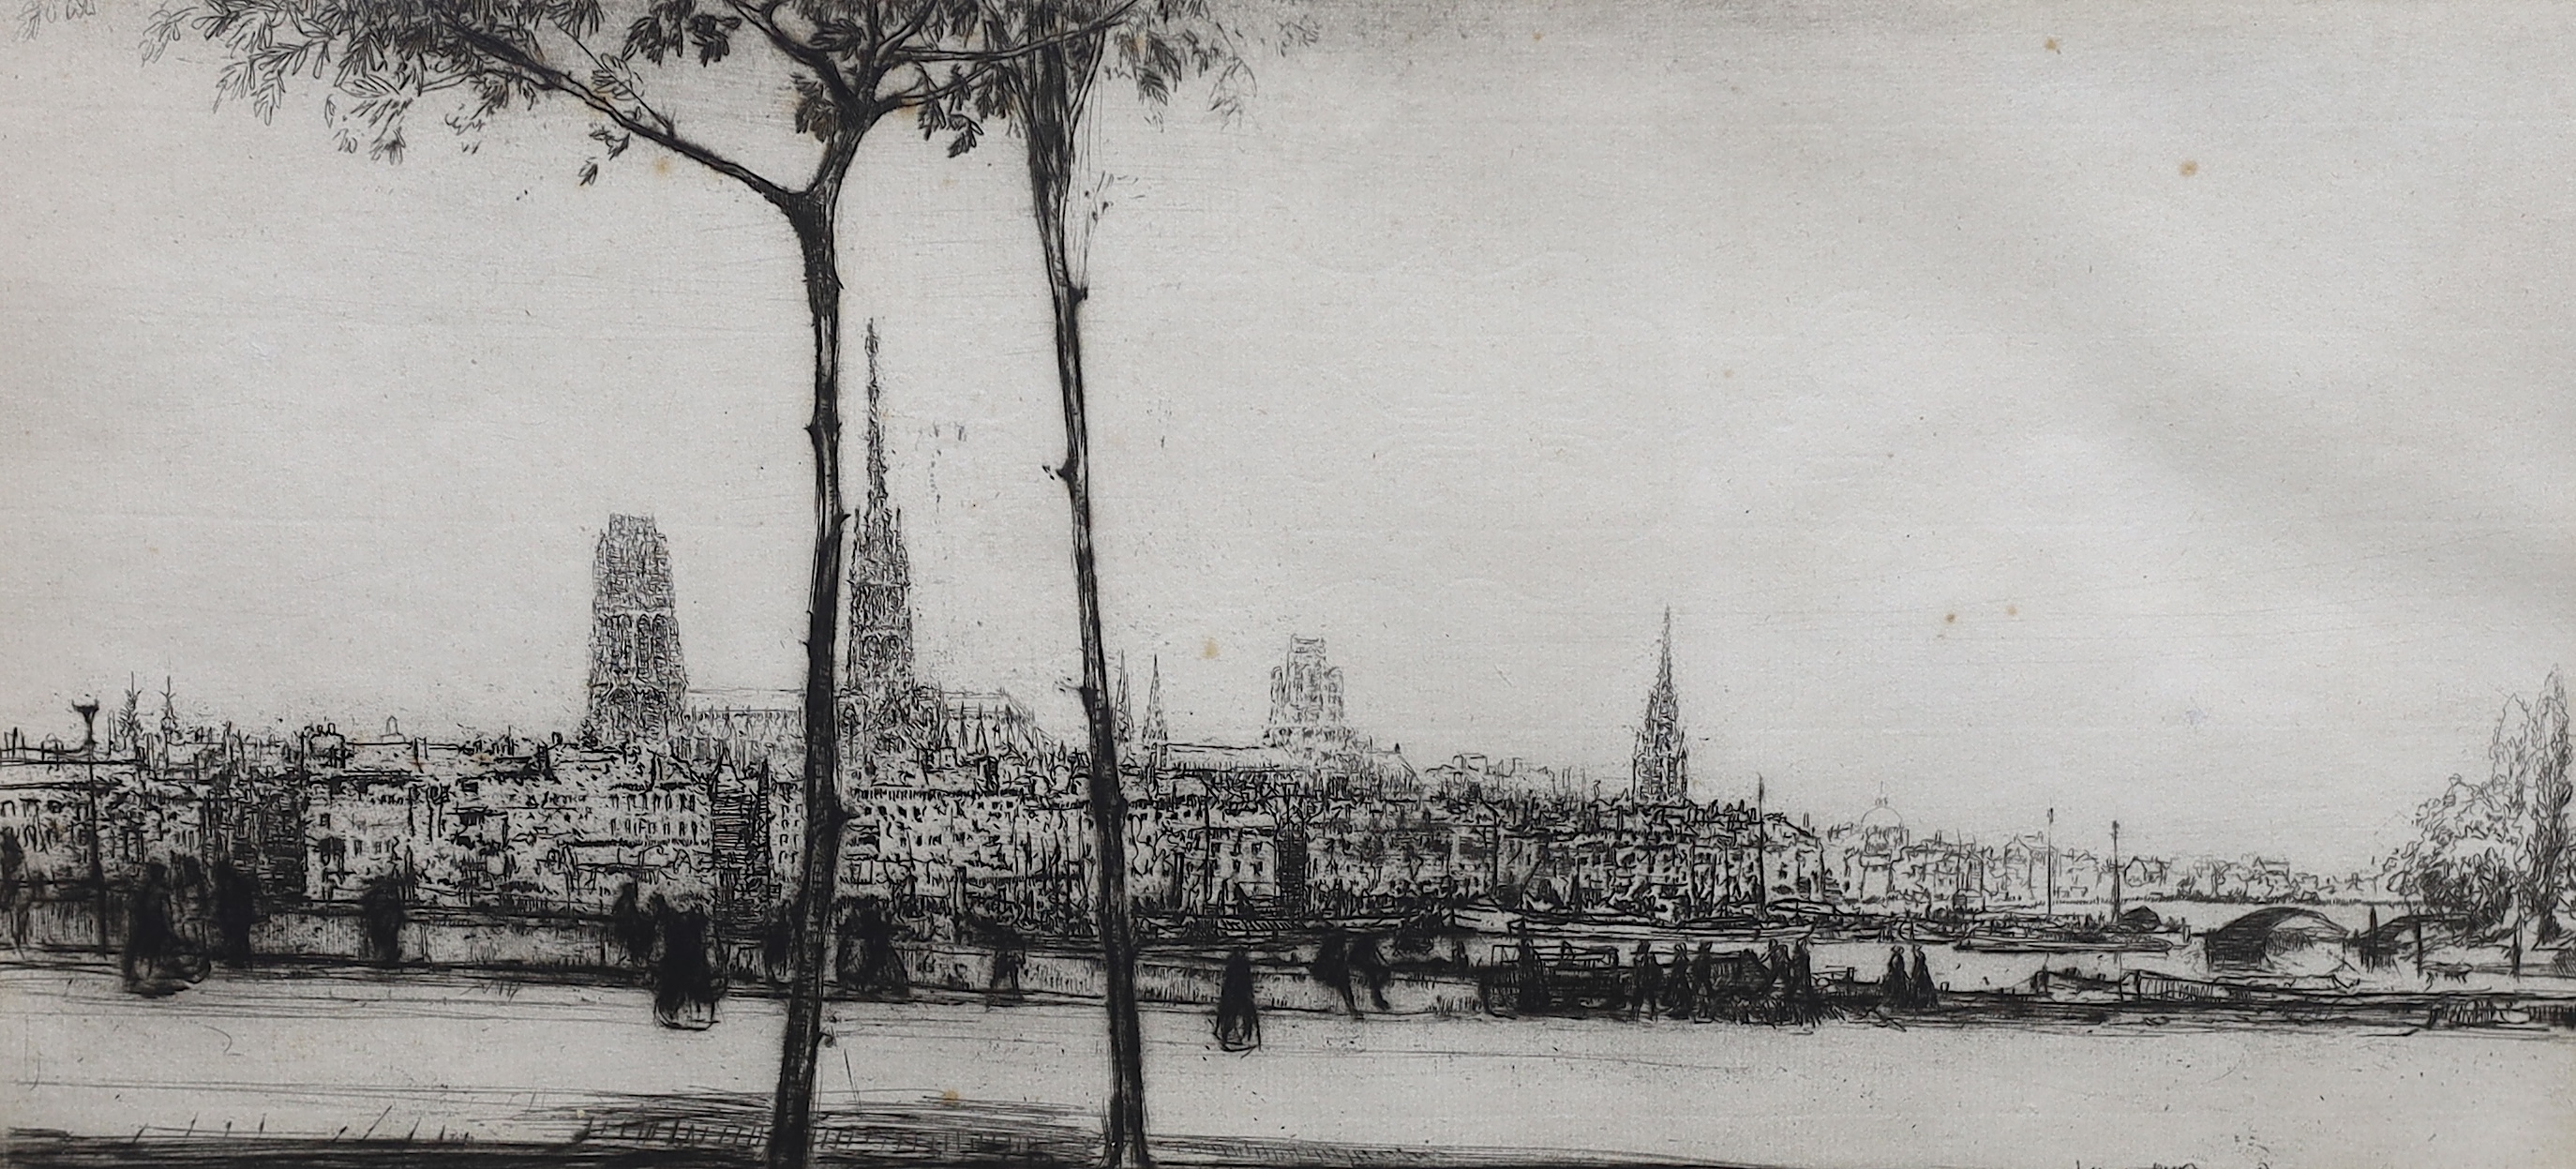 James McBey (1883-1959), drypoint etching, 'Rouen', signed in ink, dated in the plate 1916, 16.5 x 36.5cm